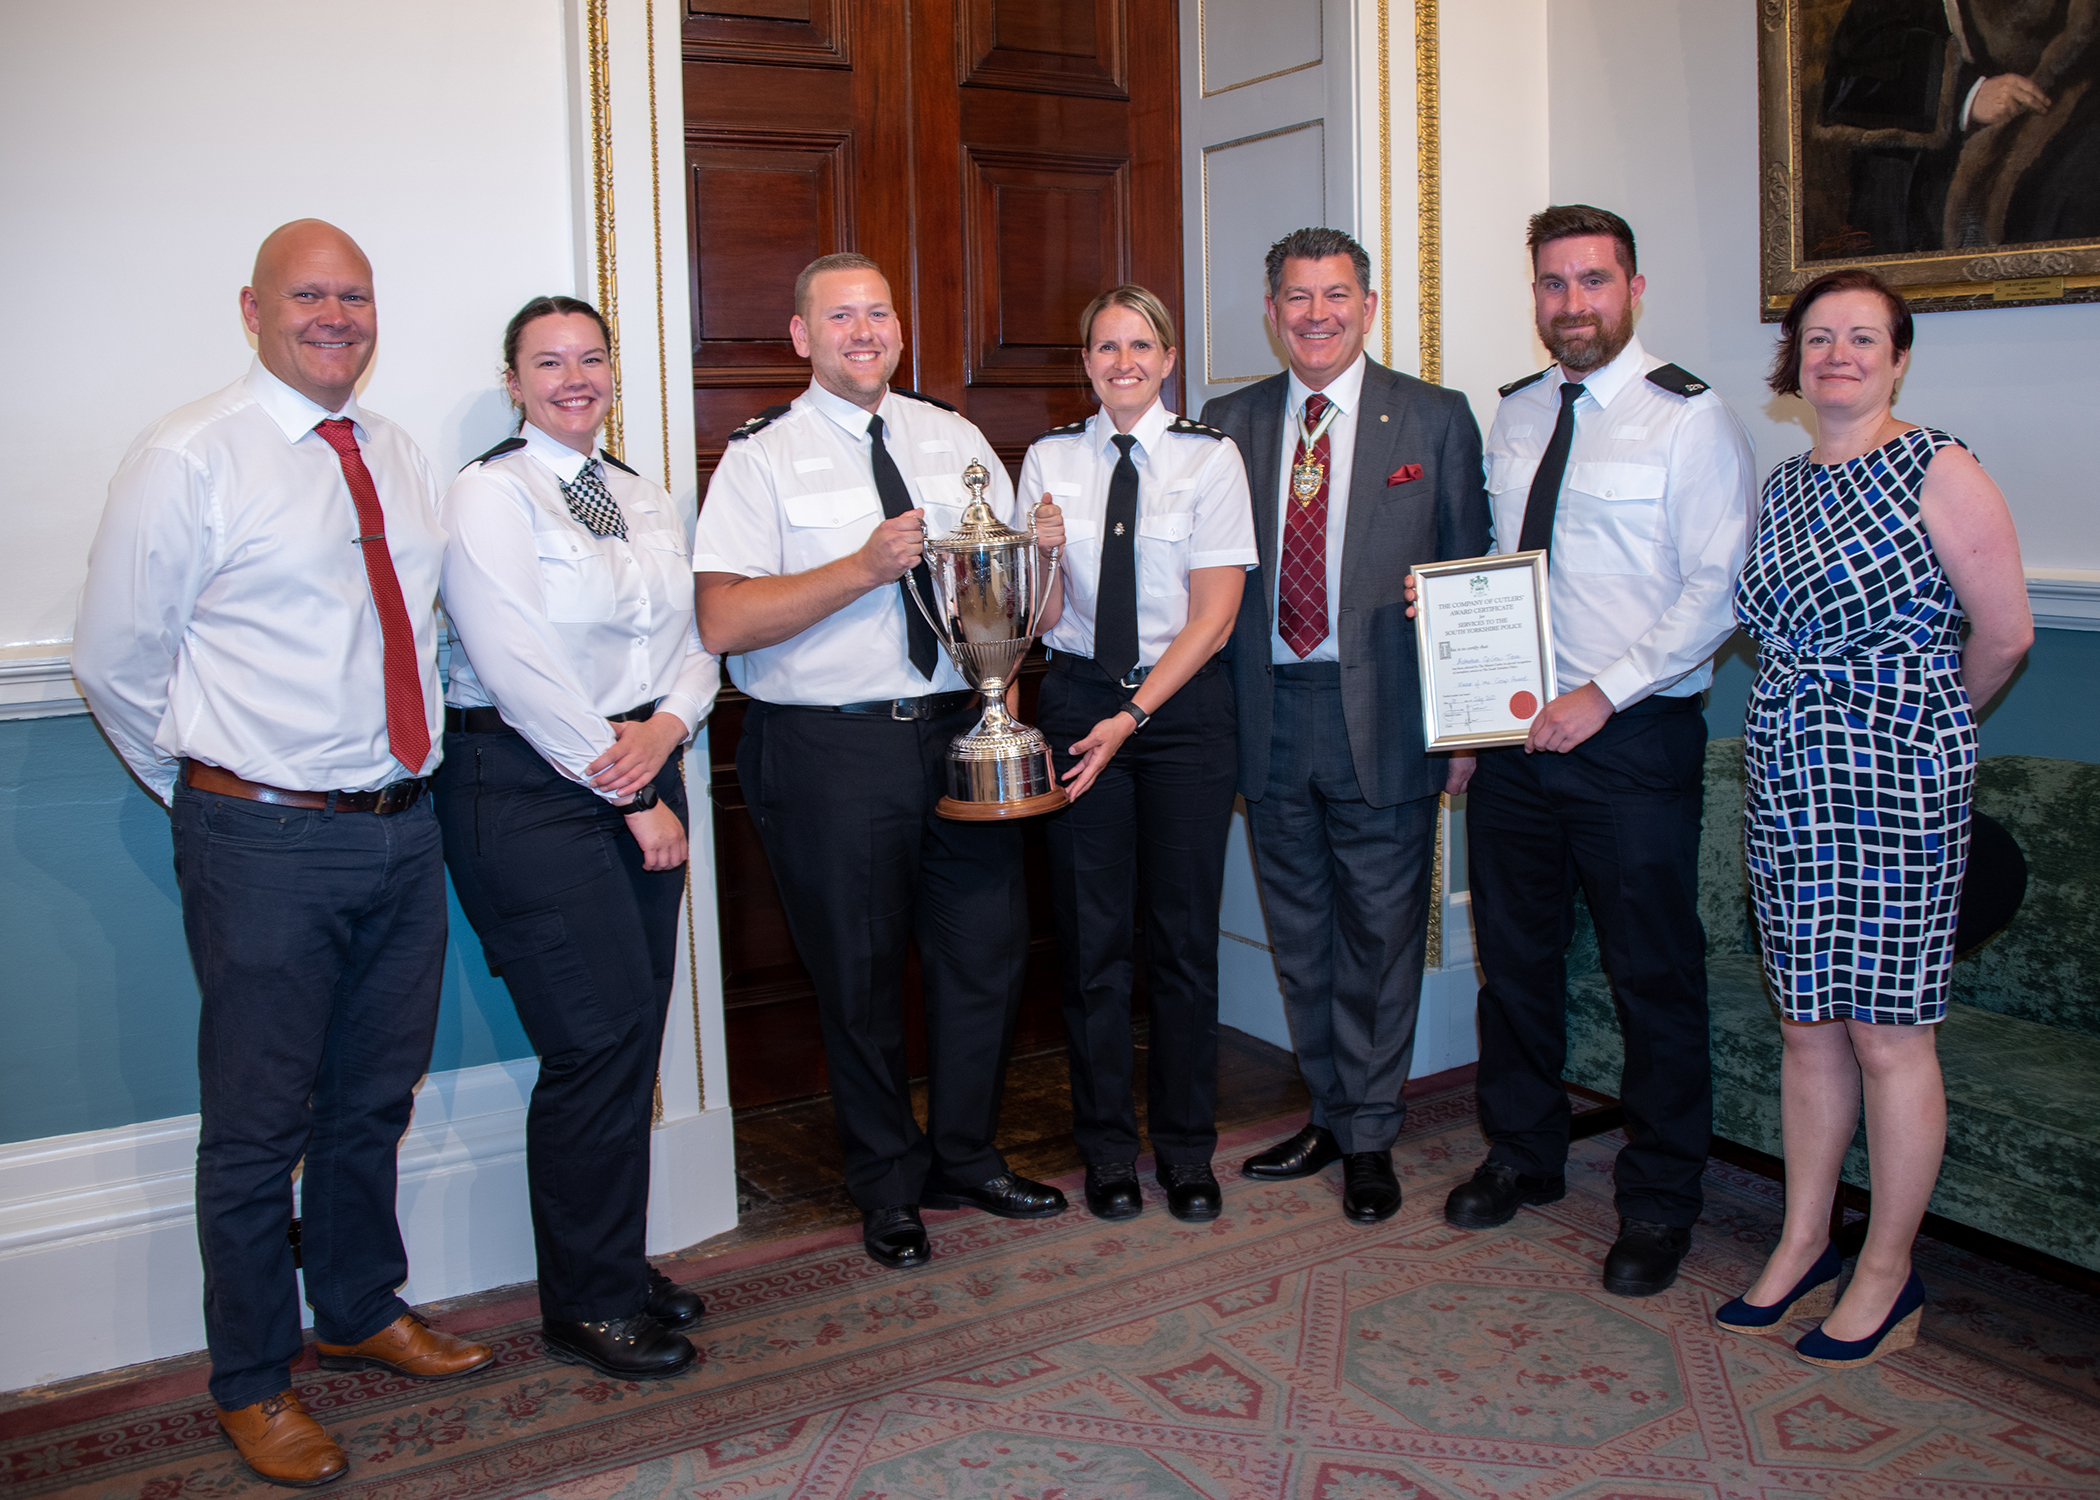 PC Liam Morris (second from the right) and the Rotherham ‘Op Grow’ team receiving the ‘Police Team’ award at the Cutlers’ Company Police and Fire Service Awards. Photo credit: South Yorkshire Police